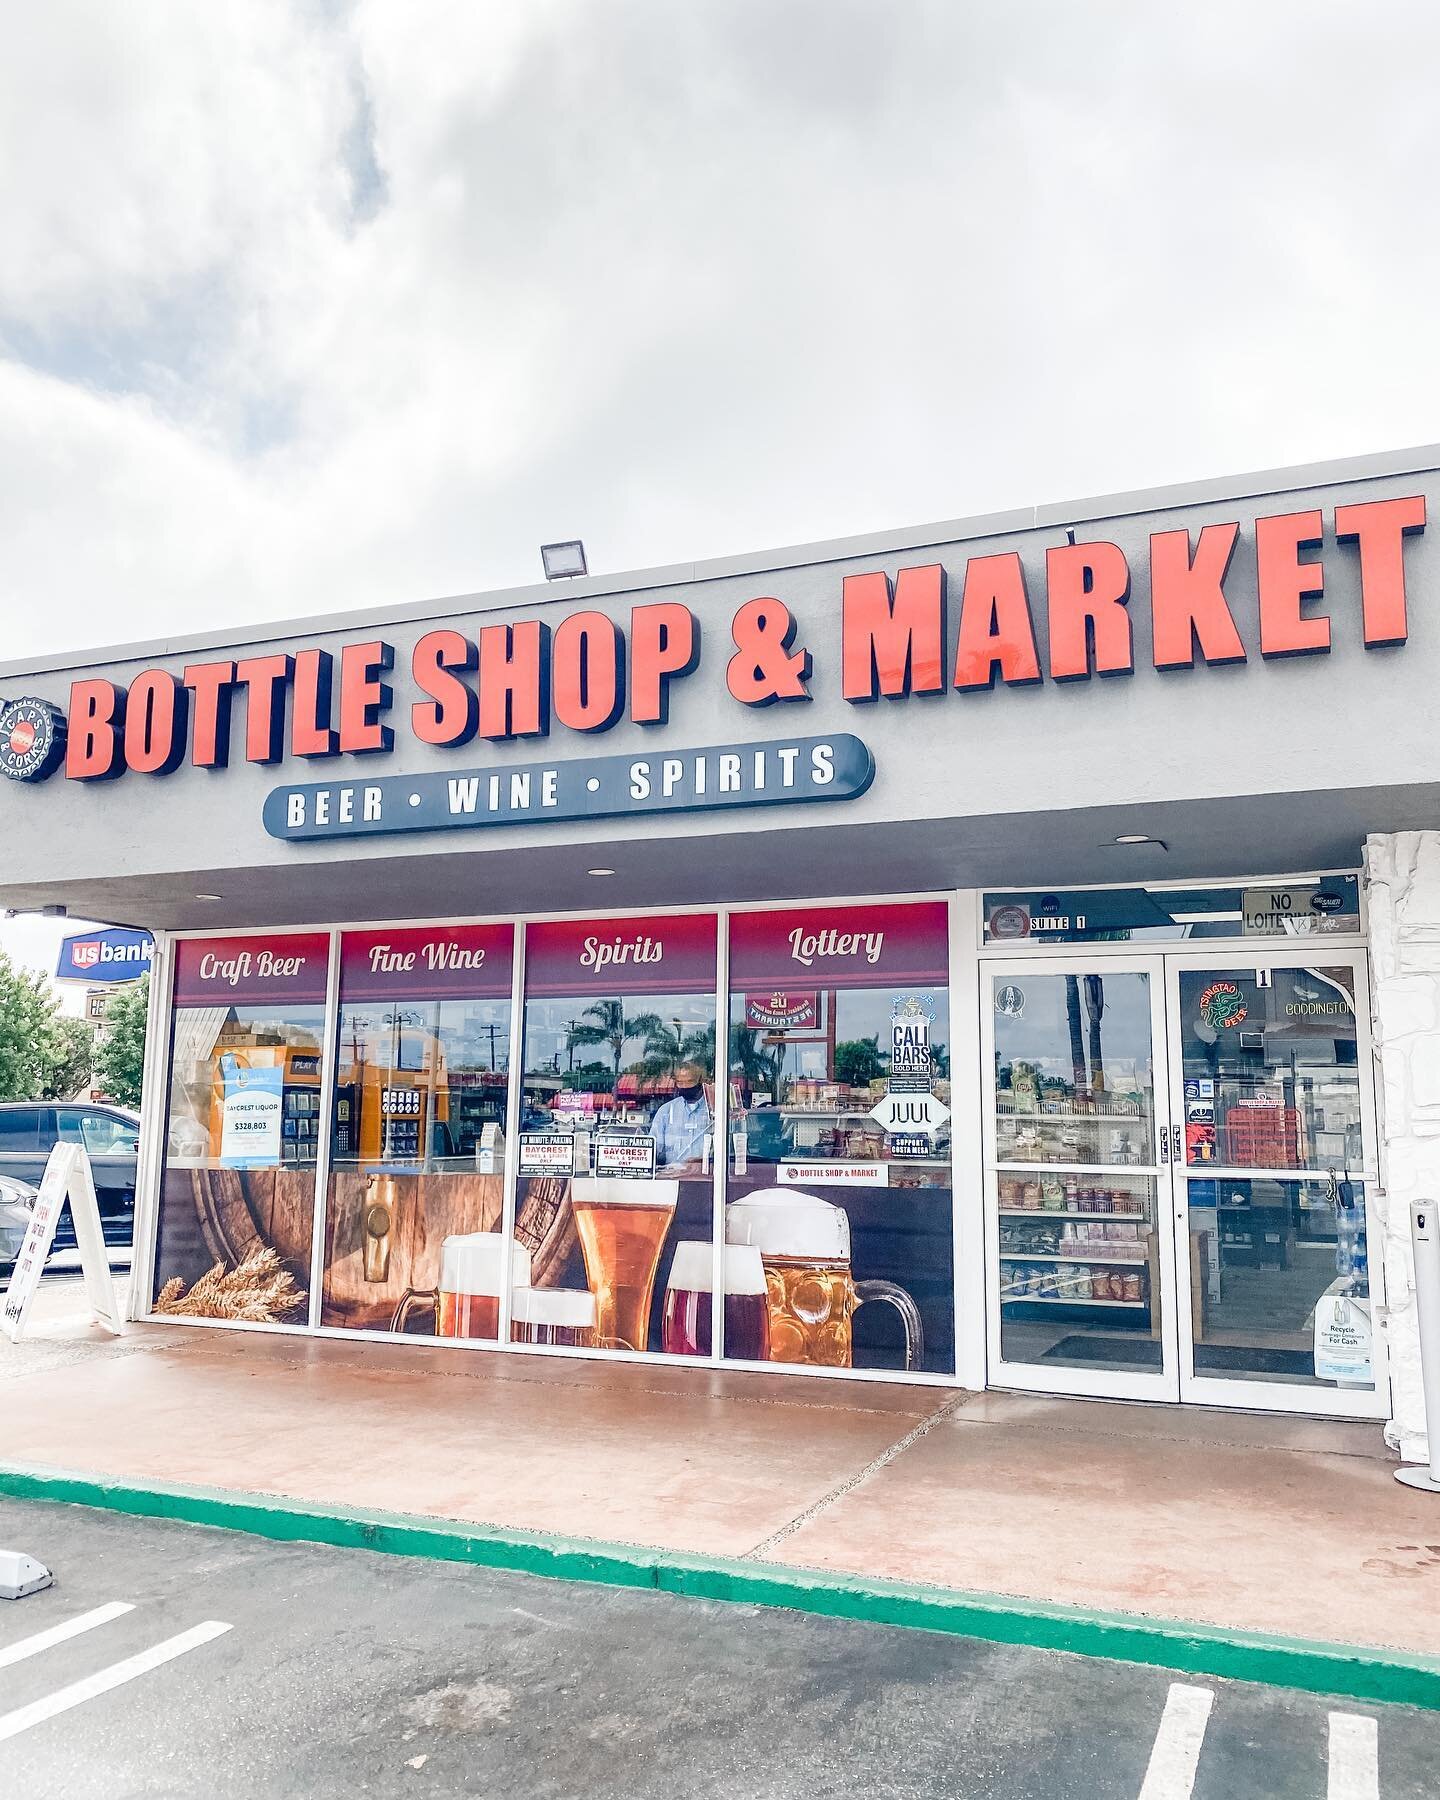 Your local neighborhood hot spot for your Fourth of July festivities! ✨🍻 @baycrest_caps_corks_bottleshop &bull;
&bull;
&bull;
#ShopLocal #ShopSmall #CostaMesa #beach #LoveWhereyouLive #Food #cleaners #restaurants #NewportBeach #VisitNewportBeach #Il